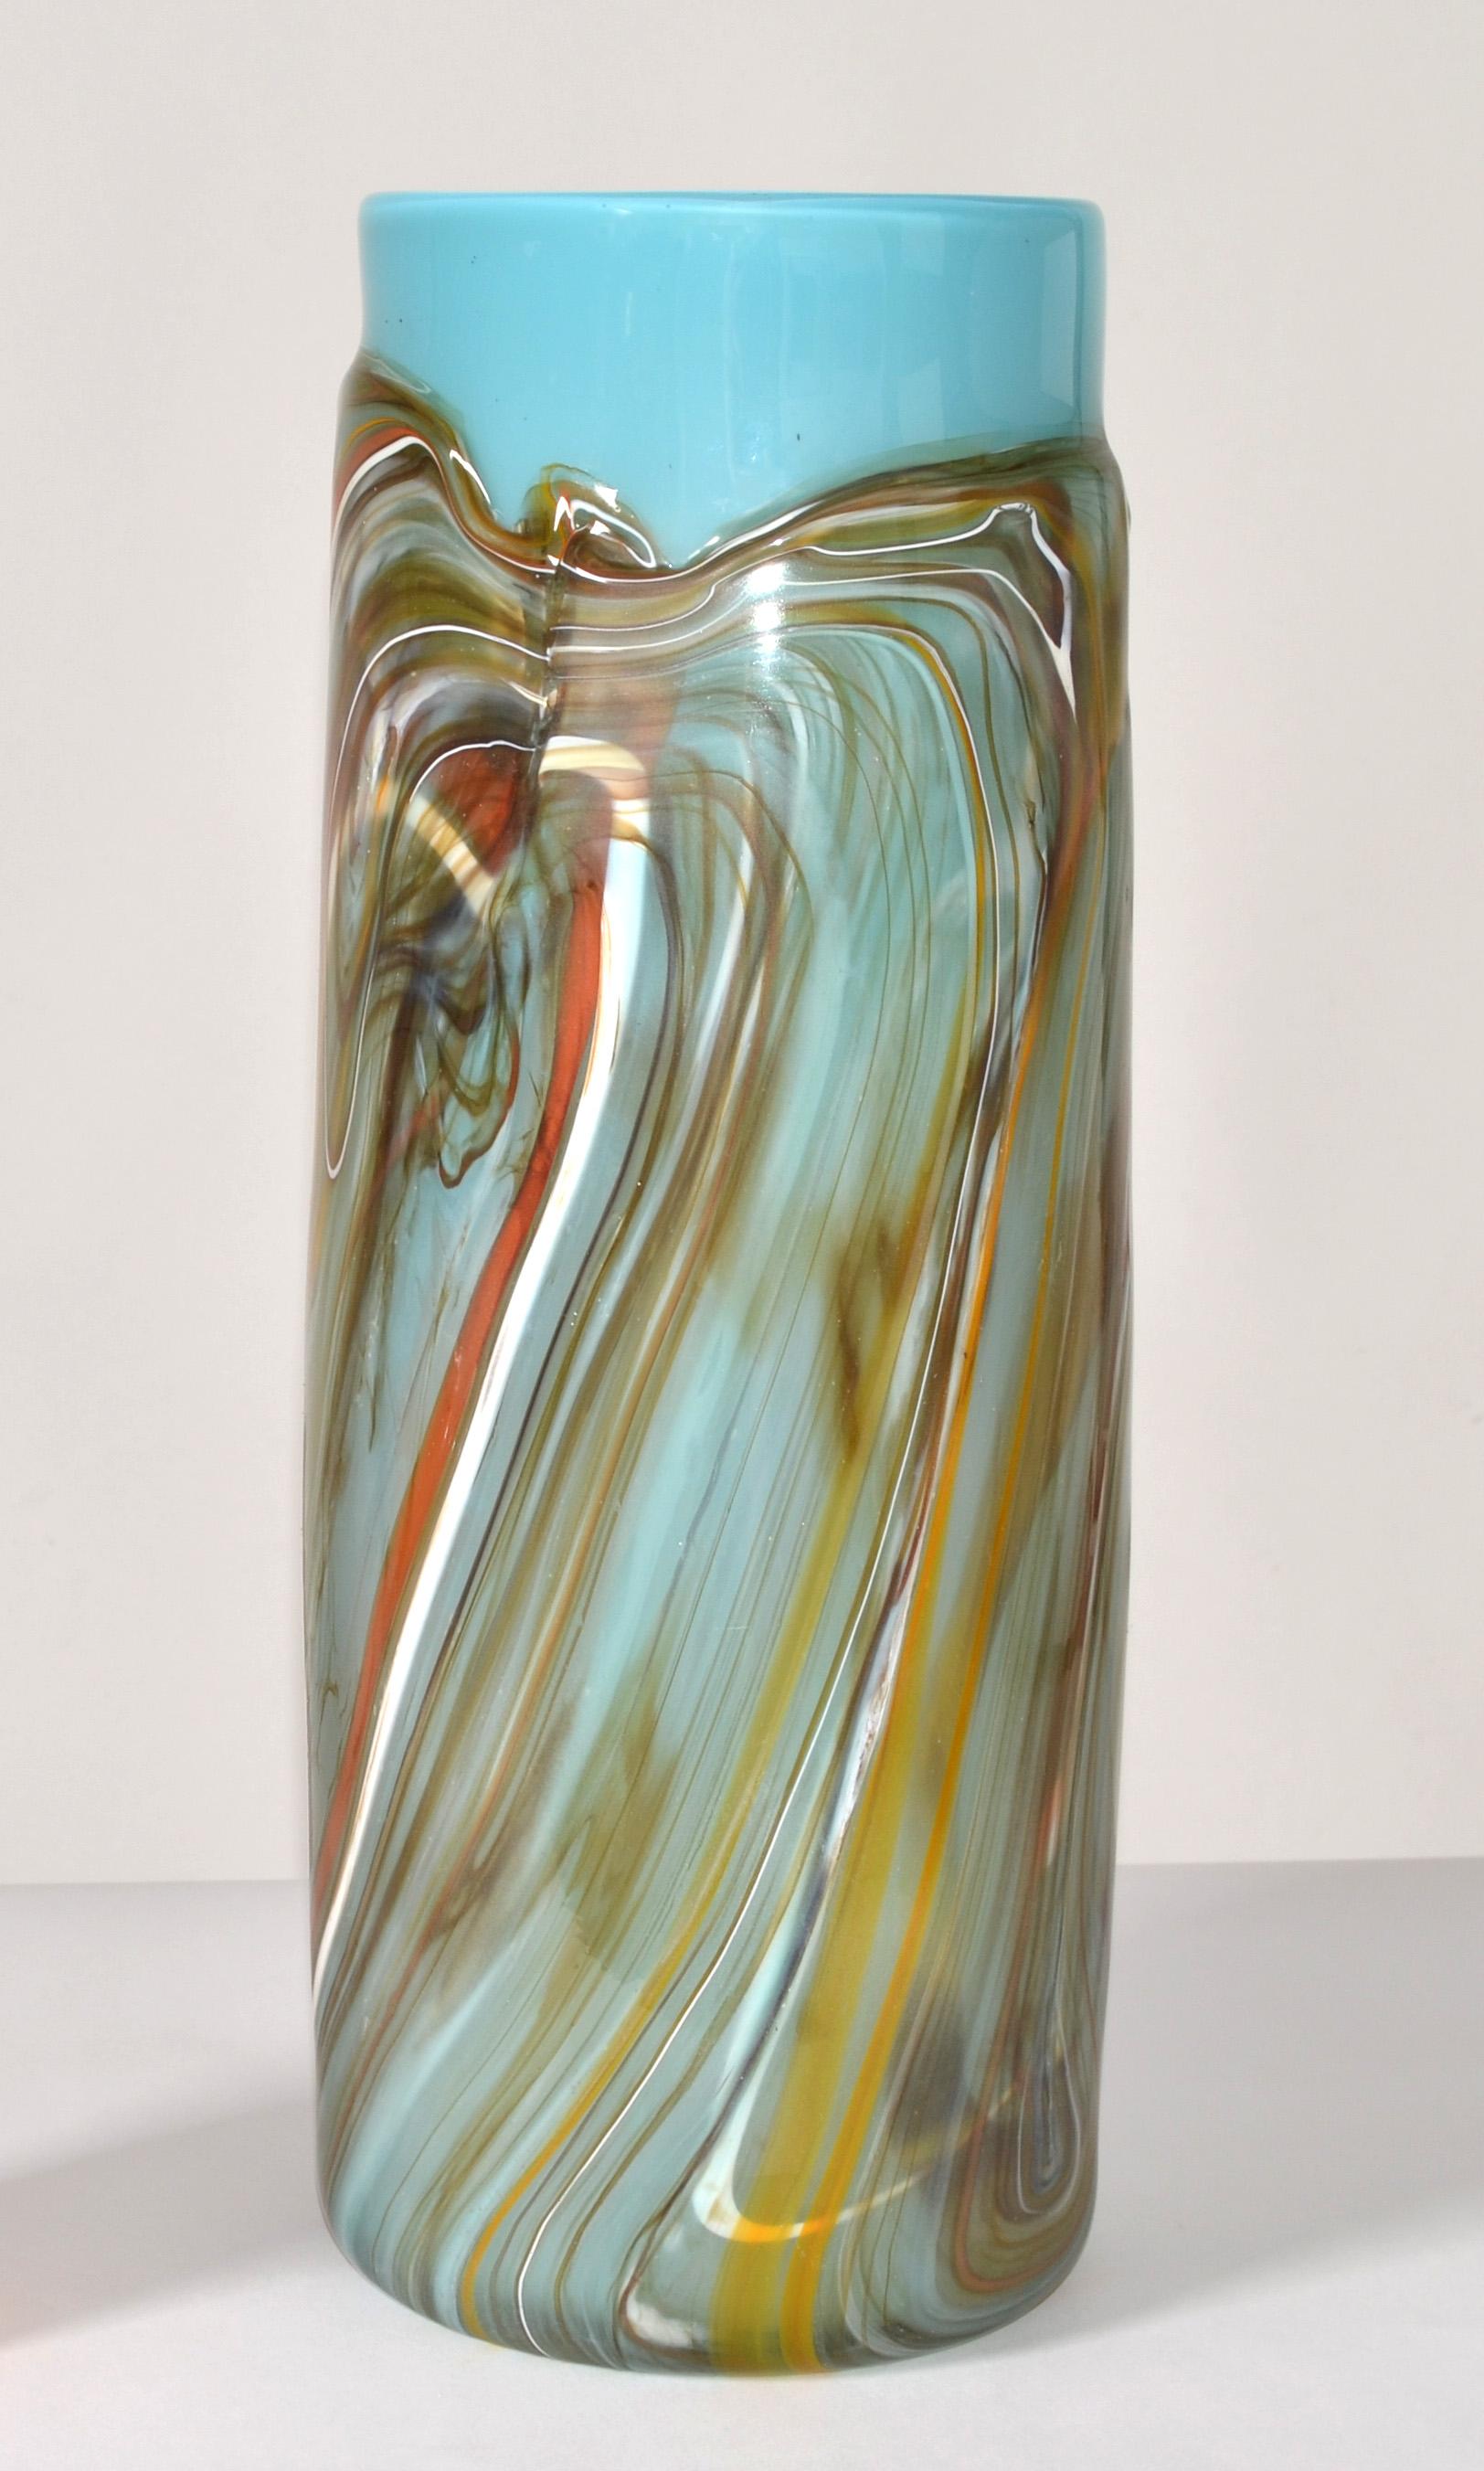 Mid-Century Modern Vintage Studio Art Blown Glass Heavy Vase Vessel Turquoise and Hues Brown 1975 For Sale